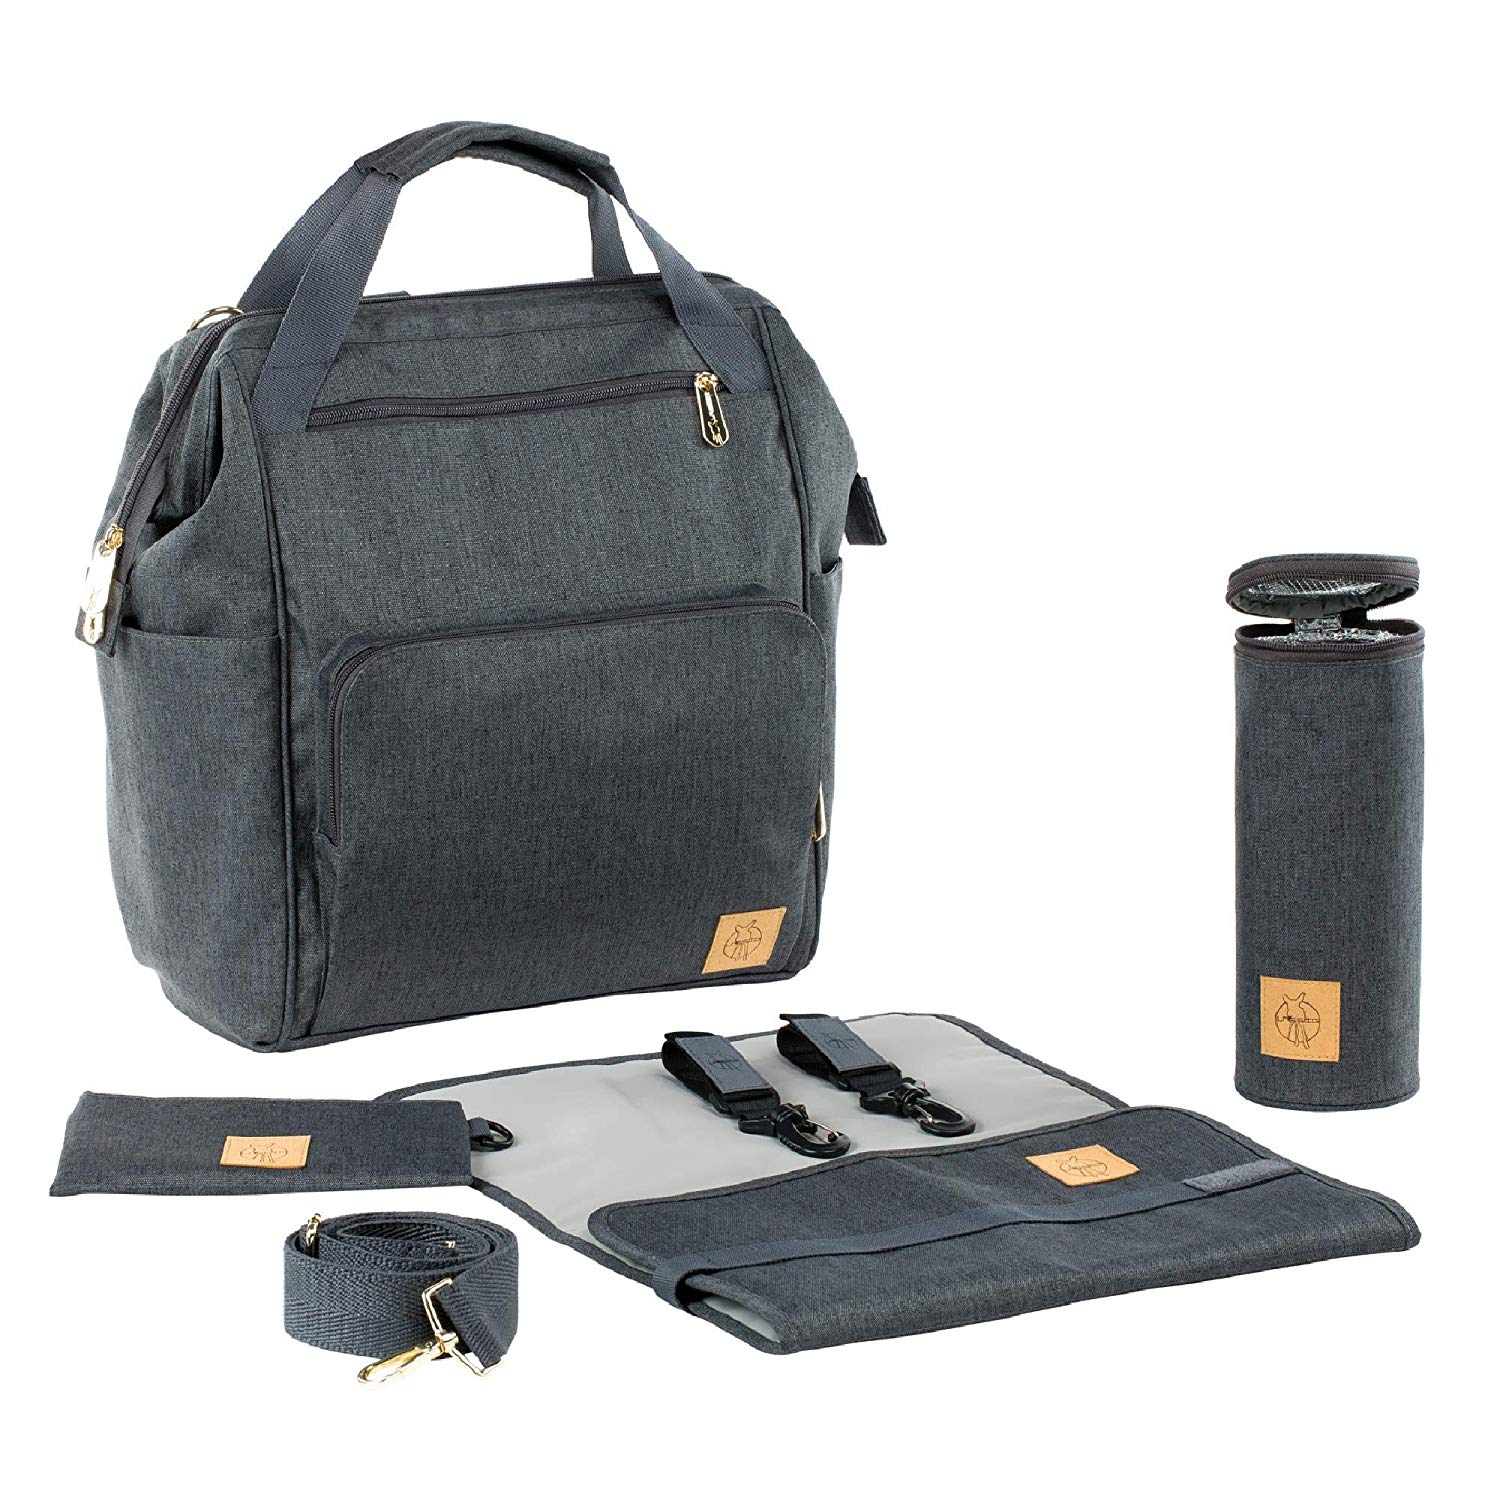 Lässig baby changing backpack, changing bag incl. Changing accessories, sustainably produced / Goldie Backpack charcoal